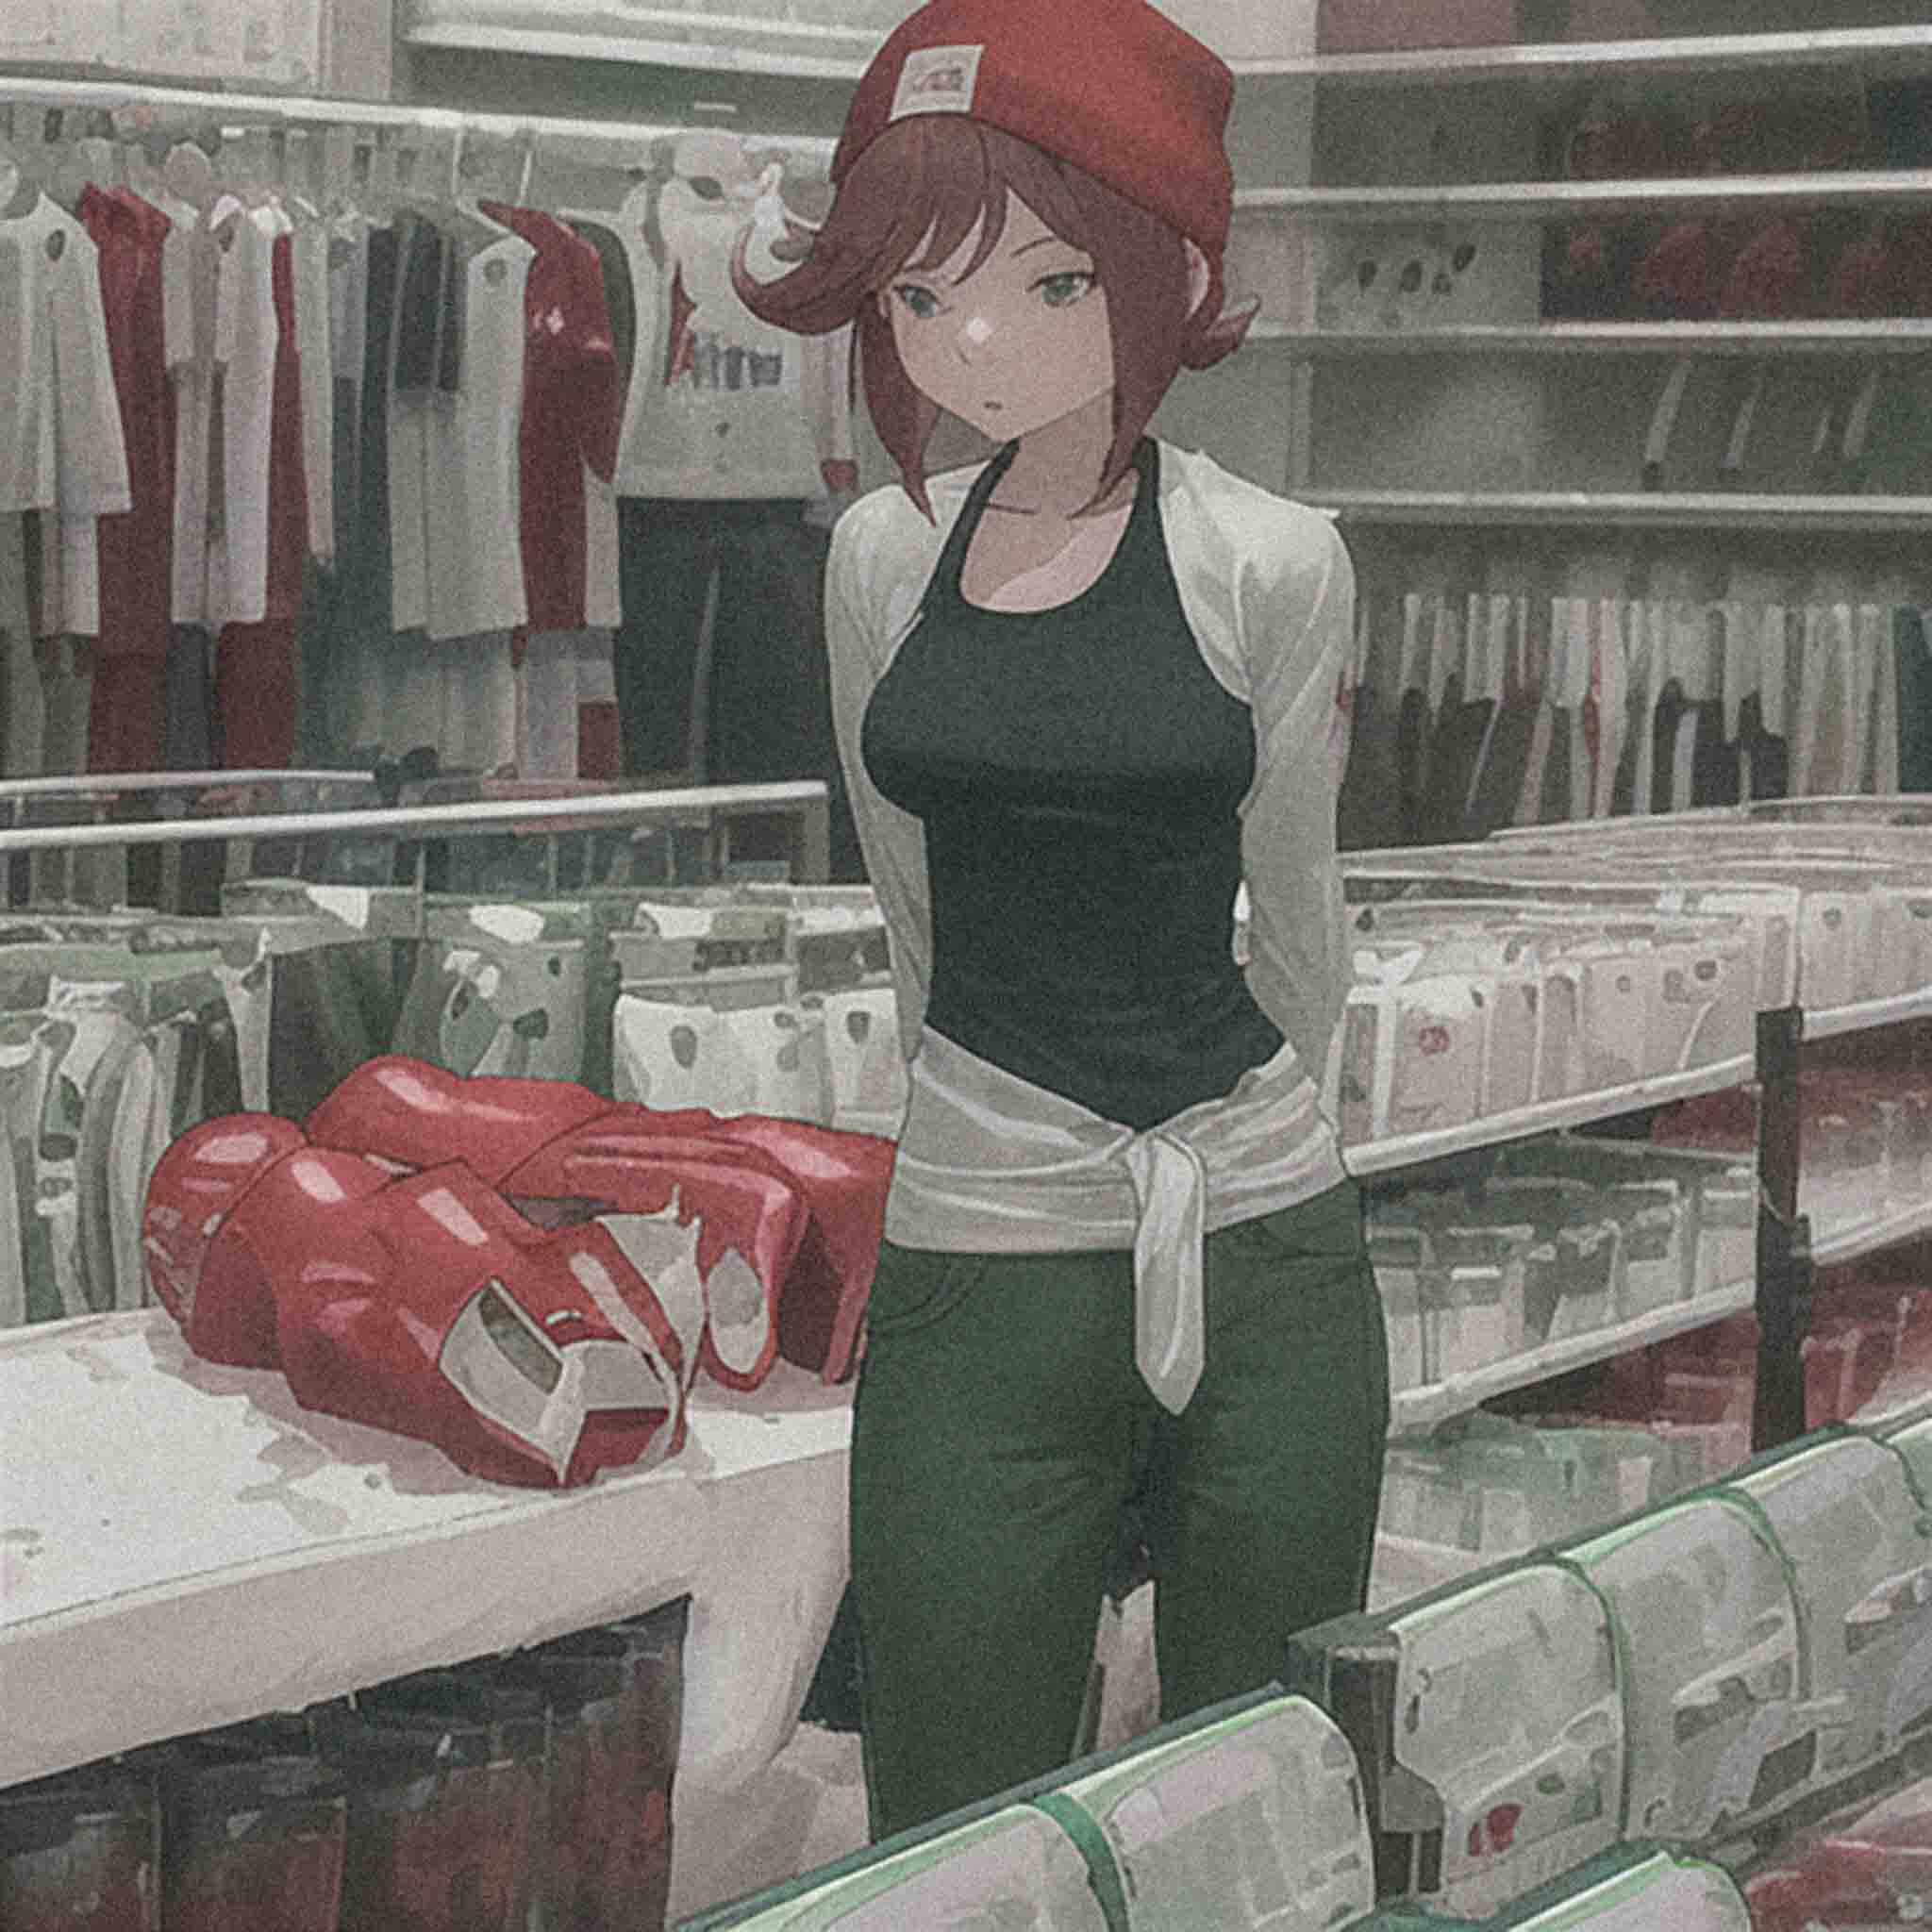 Tetsu check this out - Rin trying on gym clothes.jpg